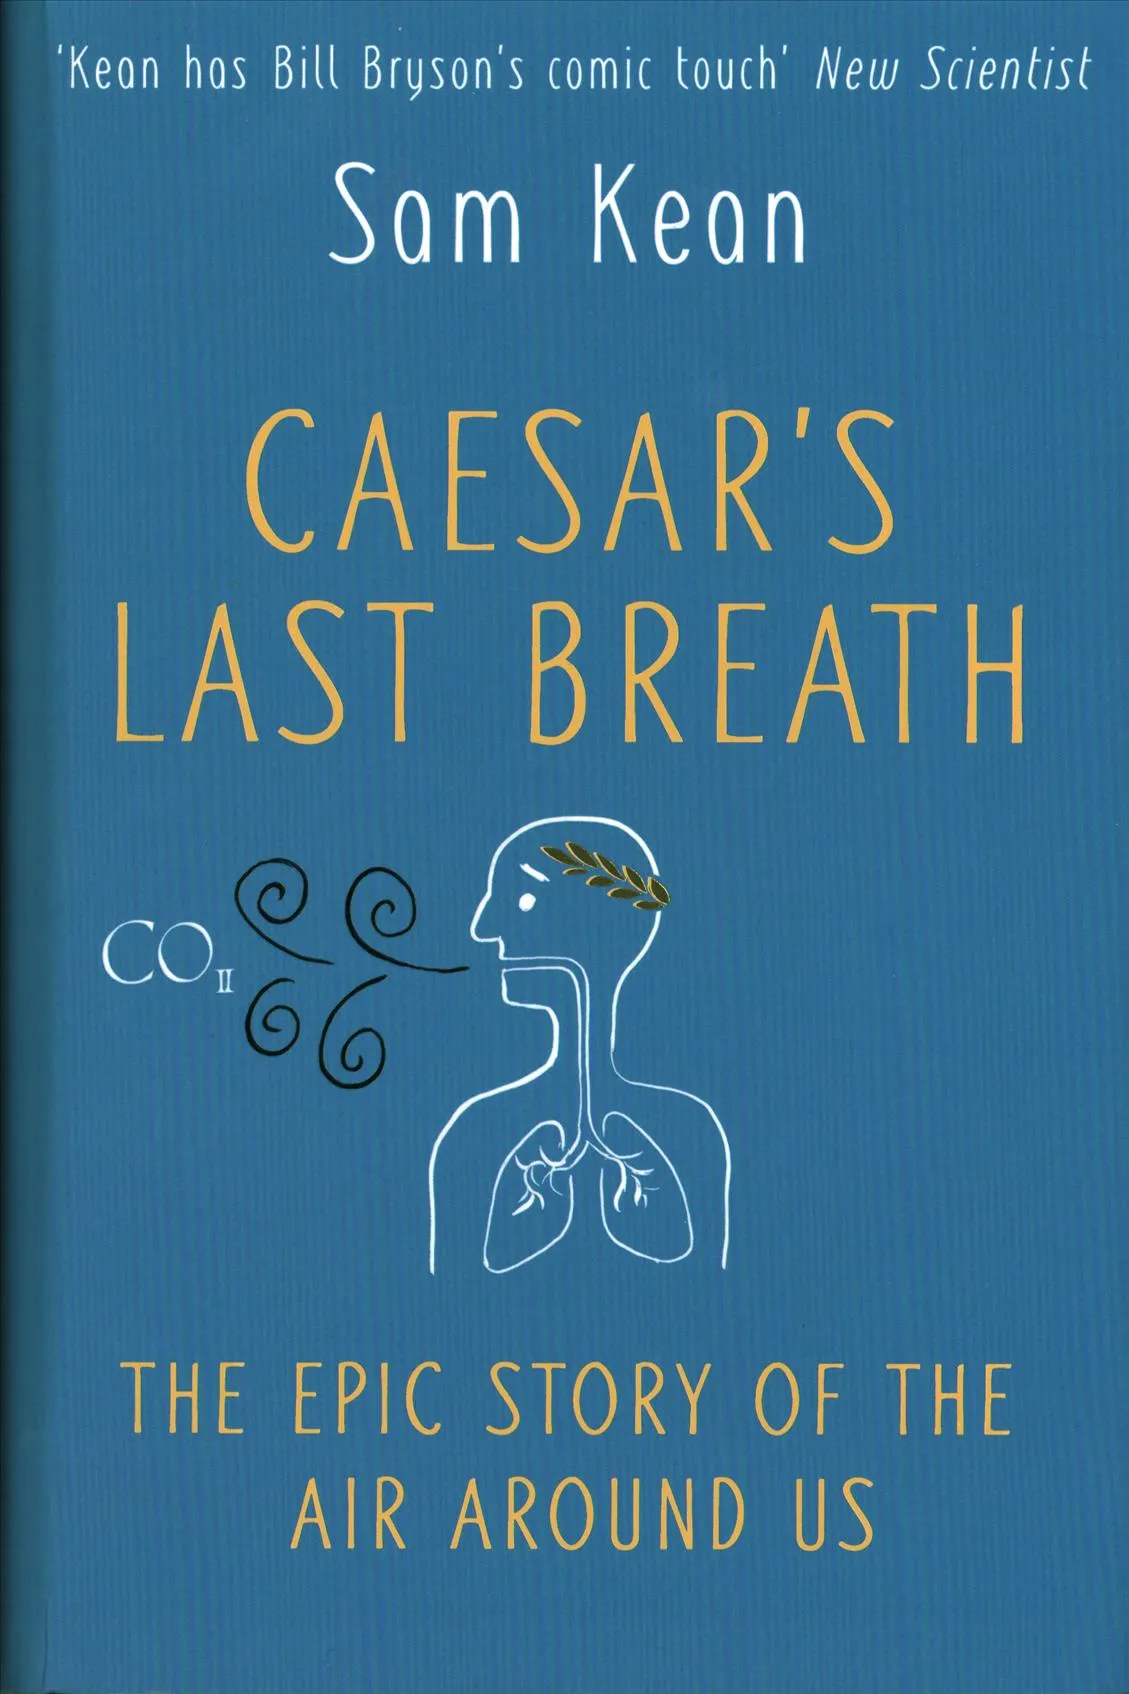 Caesar’s Last Breath by Sam Kean is out 20 July (£20, Doubleday)